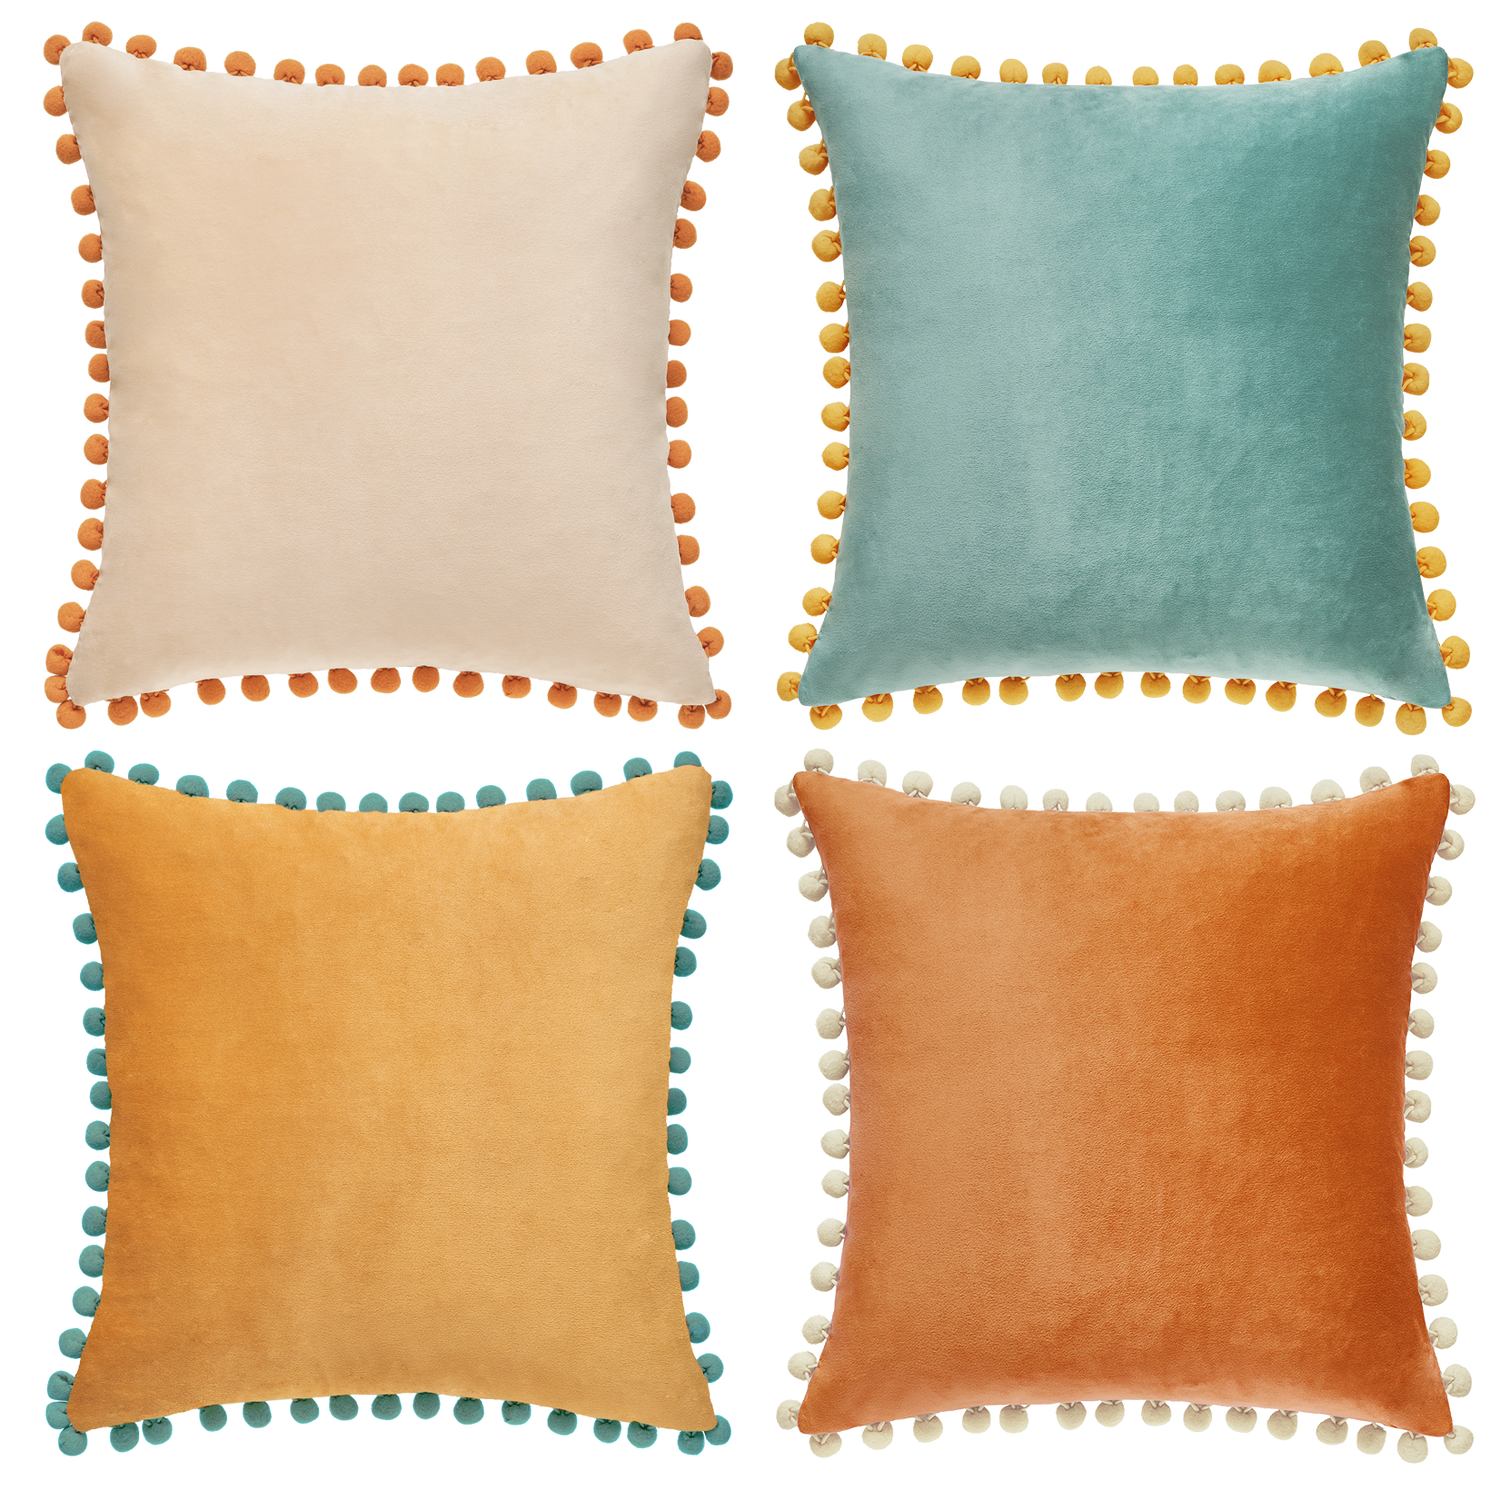 Monday Moose Decorative Throw Pillow Covers, Set of 4 Velvet Double-Sided  Designs, Pillow Inserts Not Included (18x18 inch, Orange/Teal) 